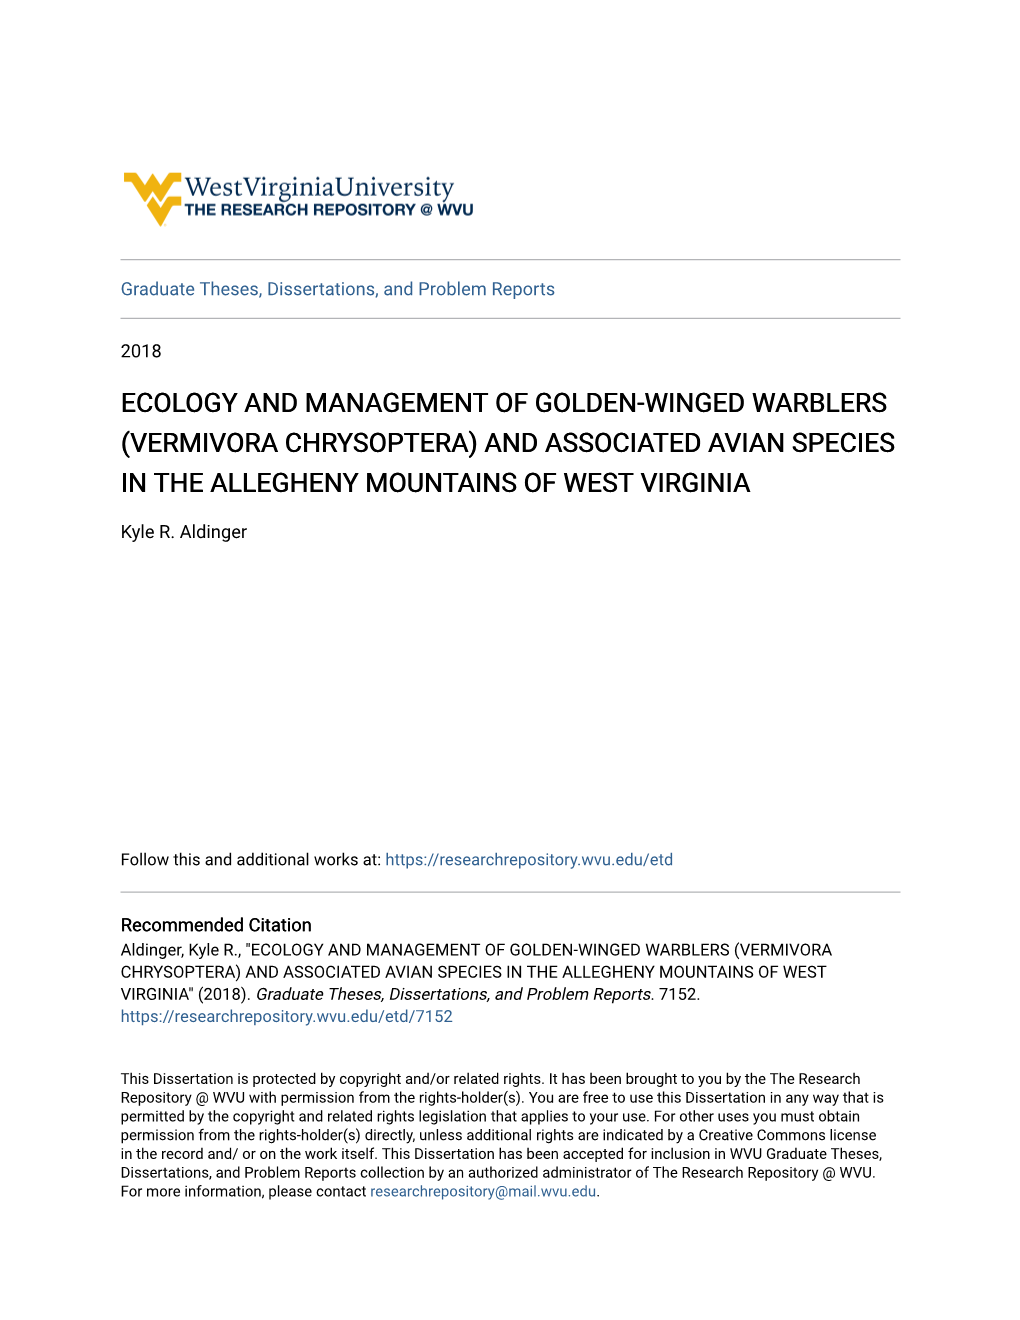 Ecology and Management of Golden-Winged Warblers (Vermivora Chrysoptera) and Associated Avian Species in the Allegheny Mountains of West Virginia